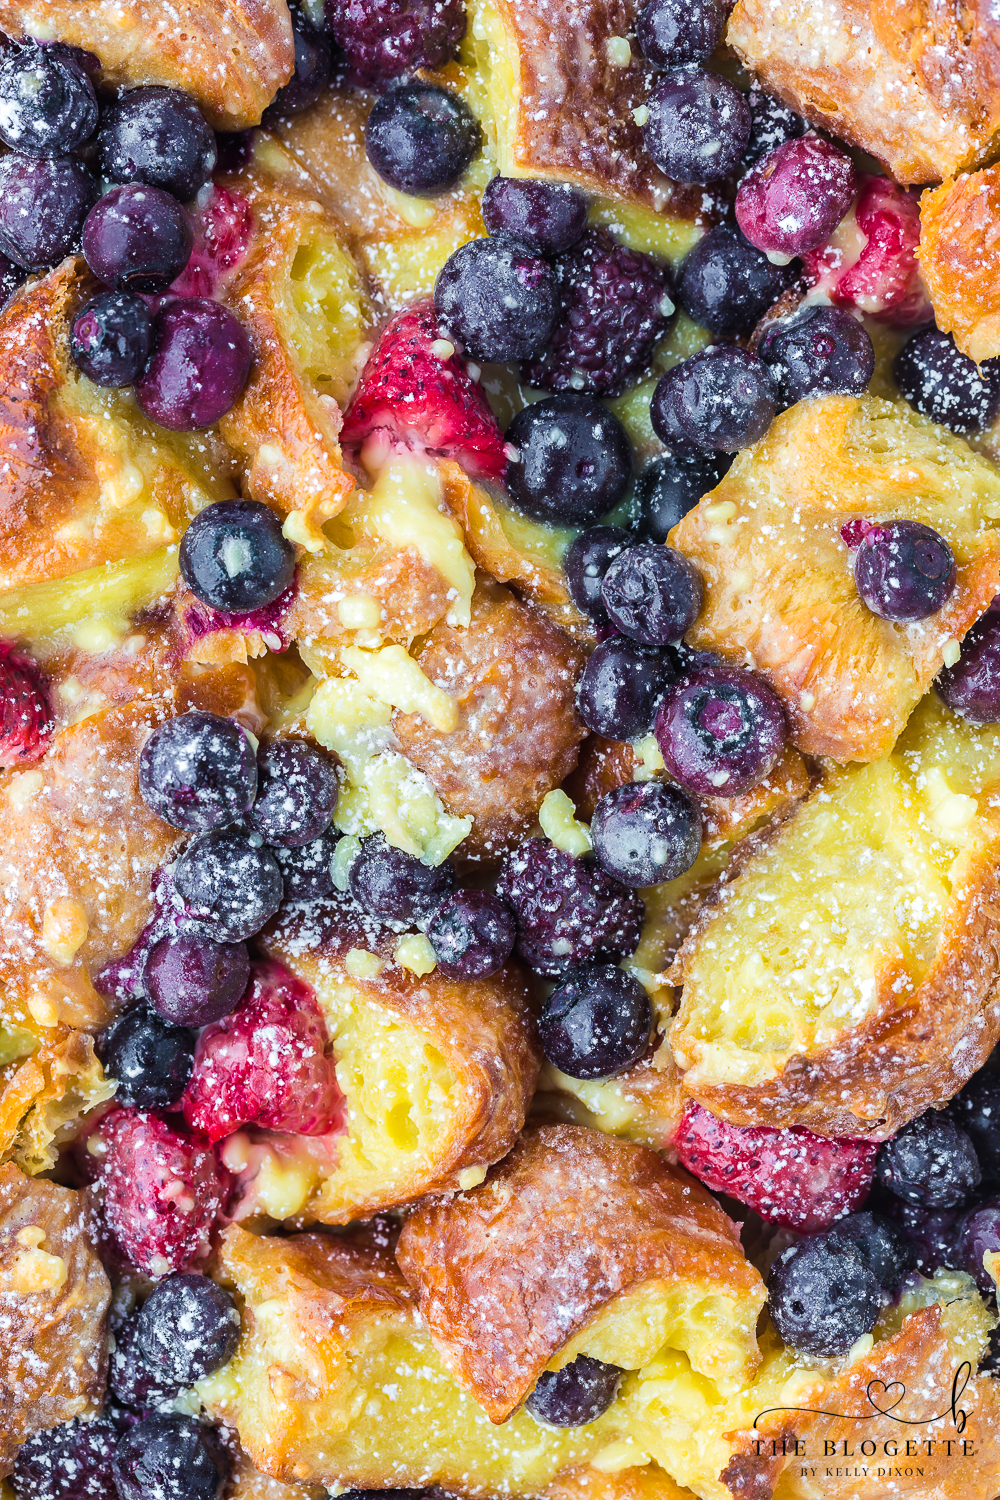 Berry Croissant Bake with layers of croissants, fresh berries, and a creamy custard.